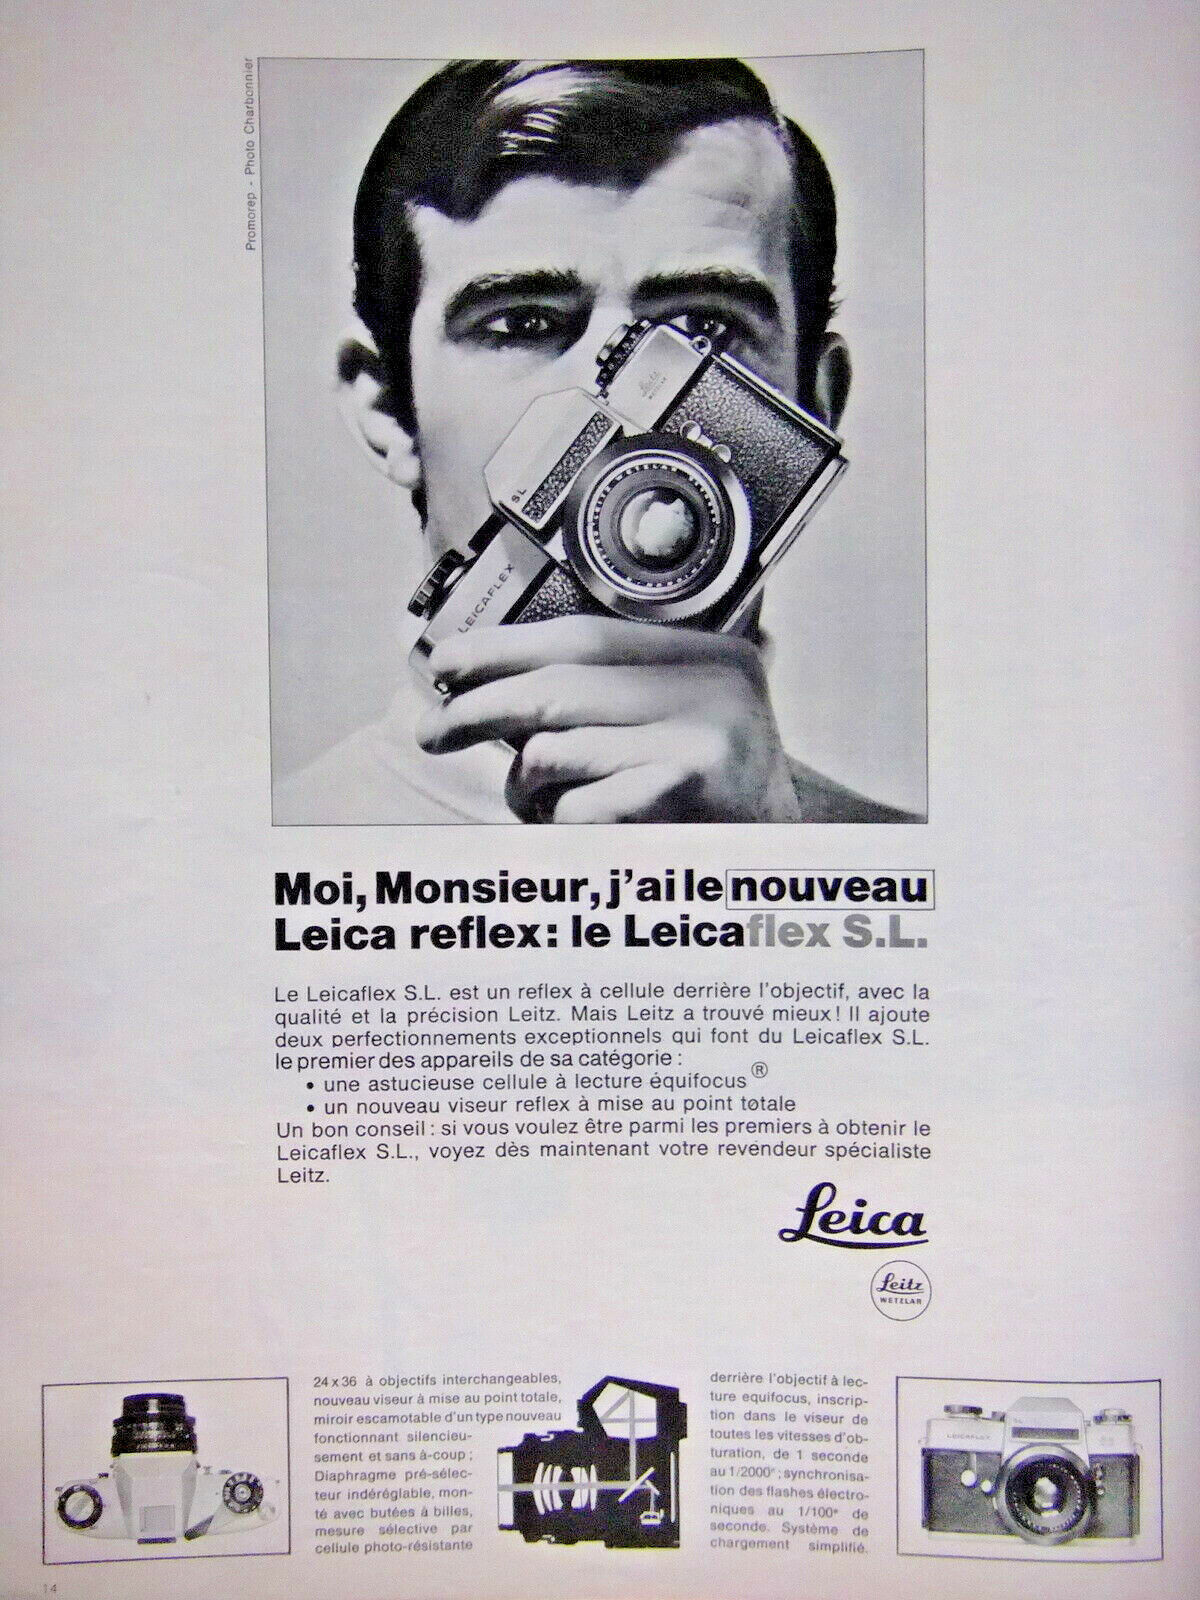 1968 PRESS ADVERTISEMENT LEICA CAMERA I HAVE THE NEW SLR LEICAFLEX S.L